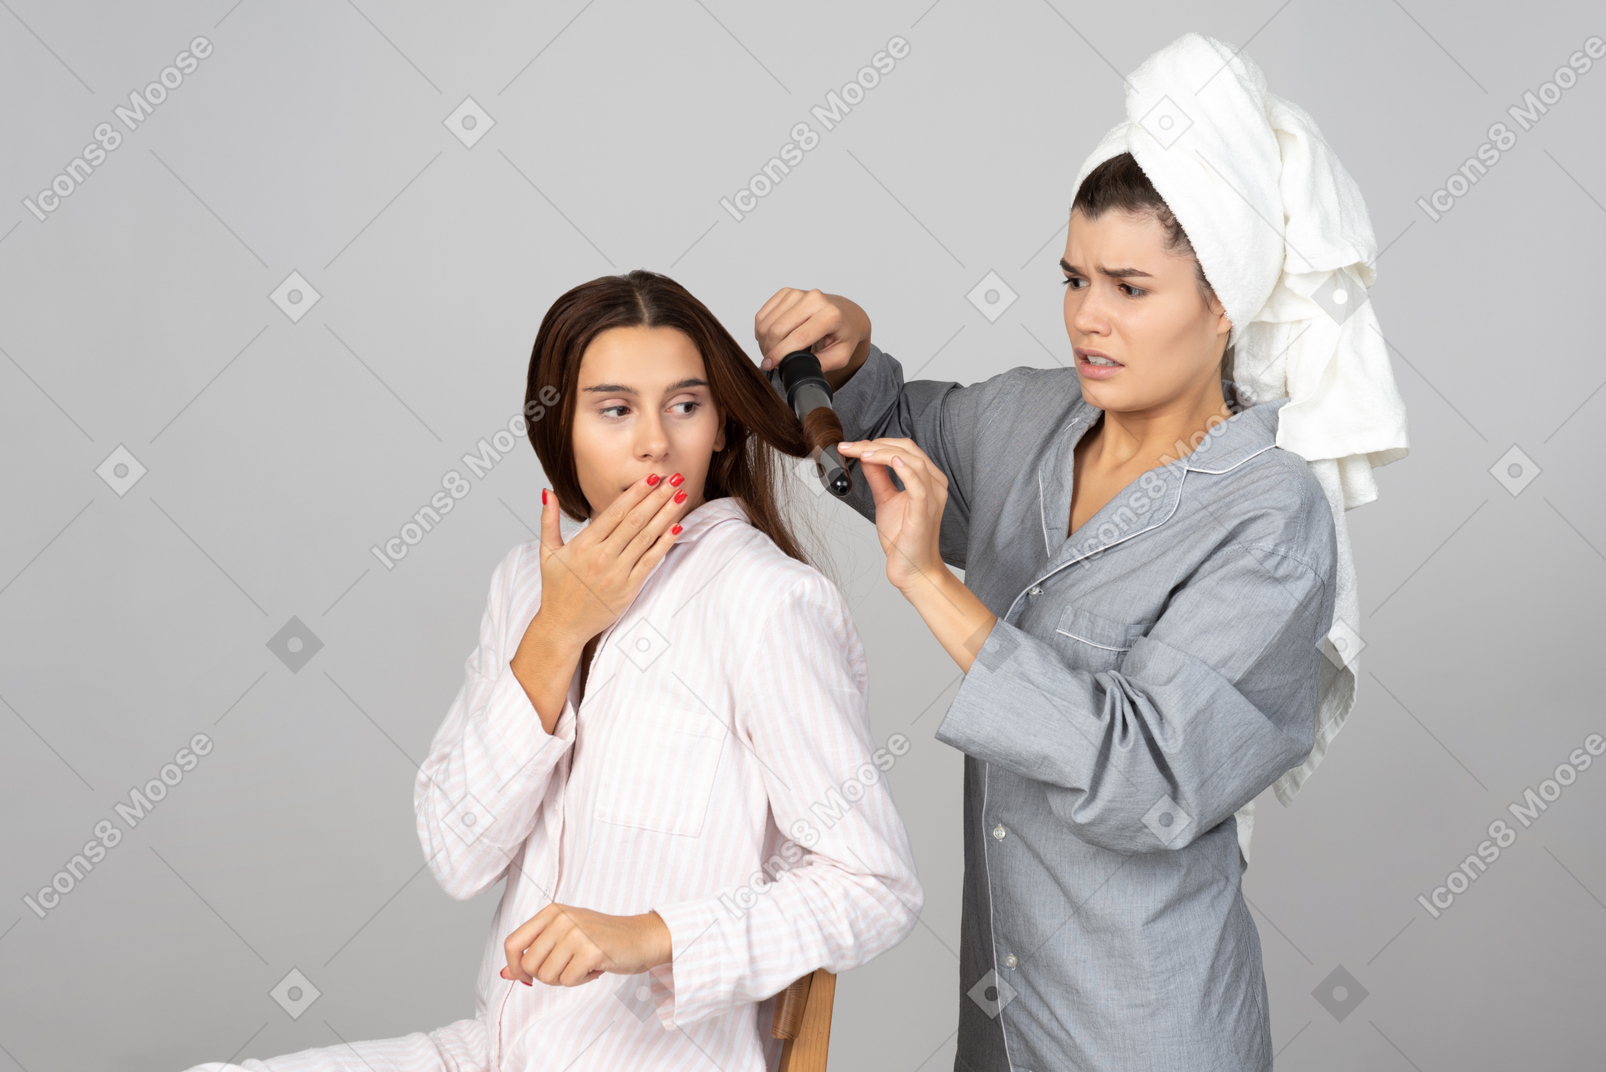 Girl hairstyling her friend's hair  with iron and looks like something went wrong